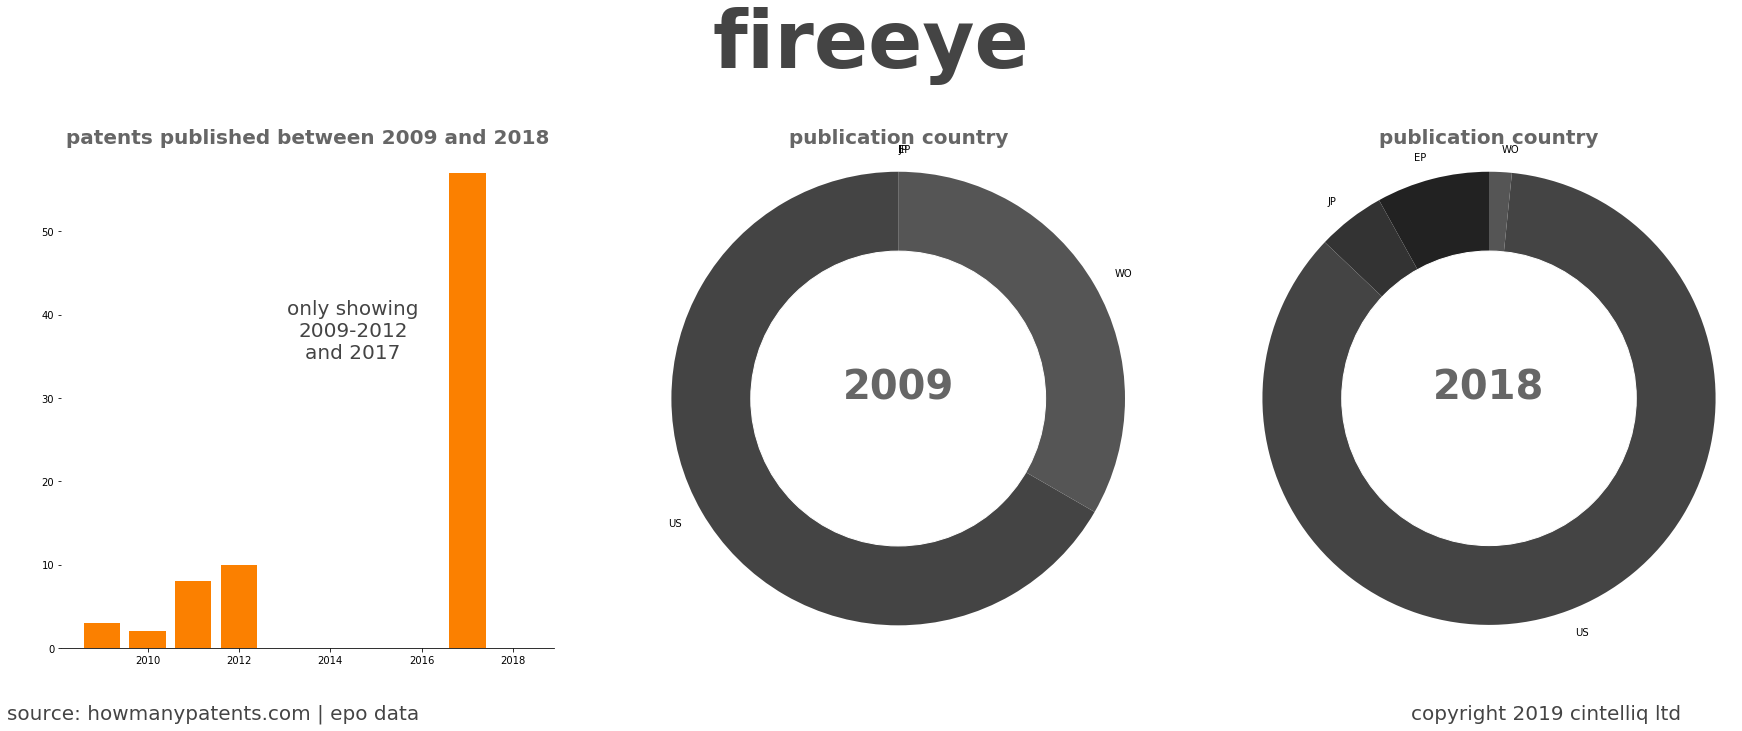 summary of patents for Fireeye